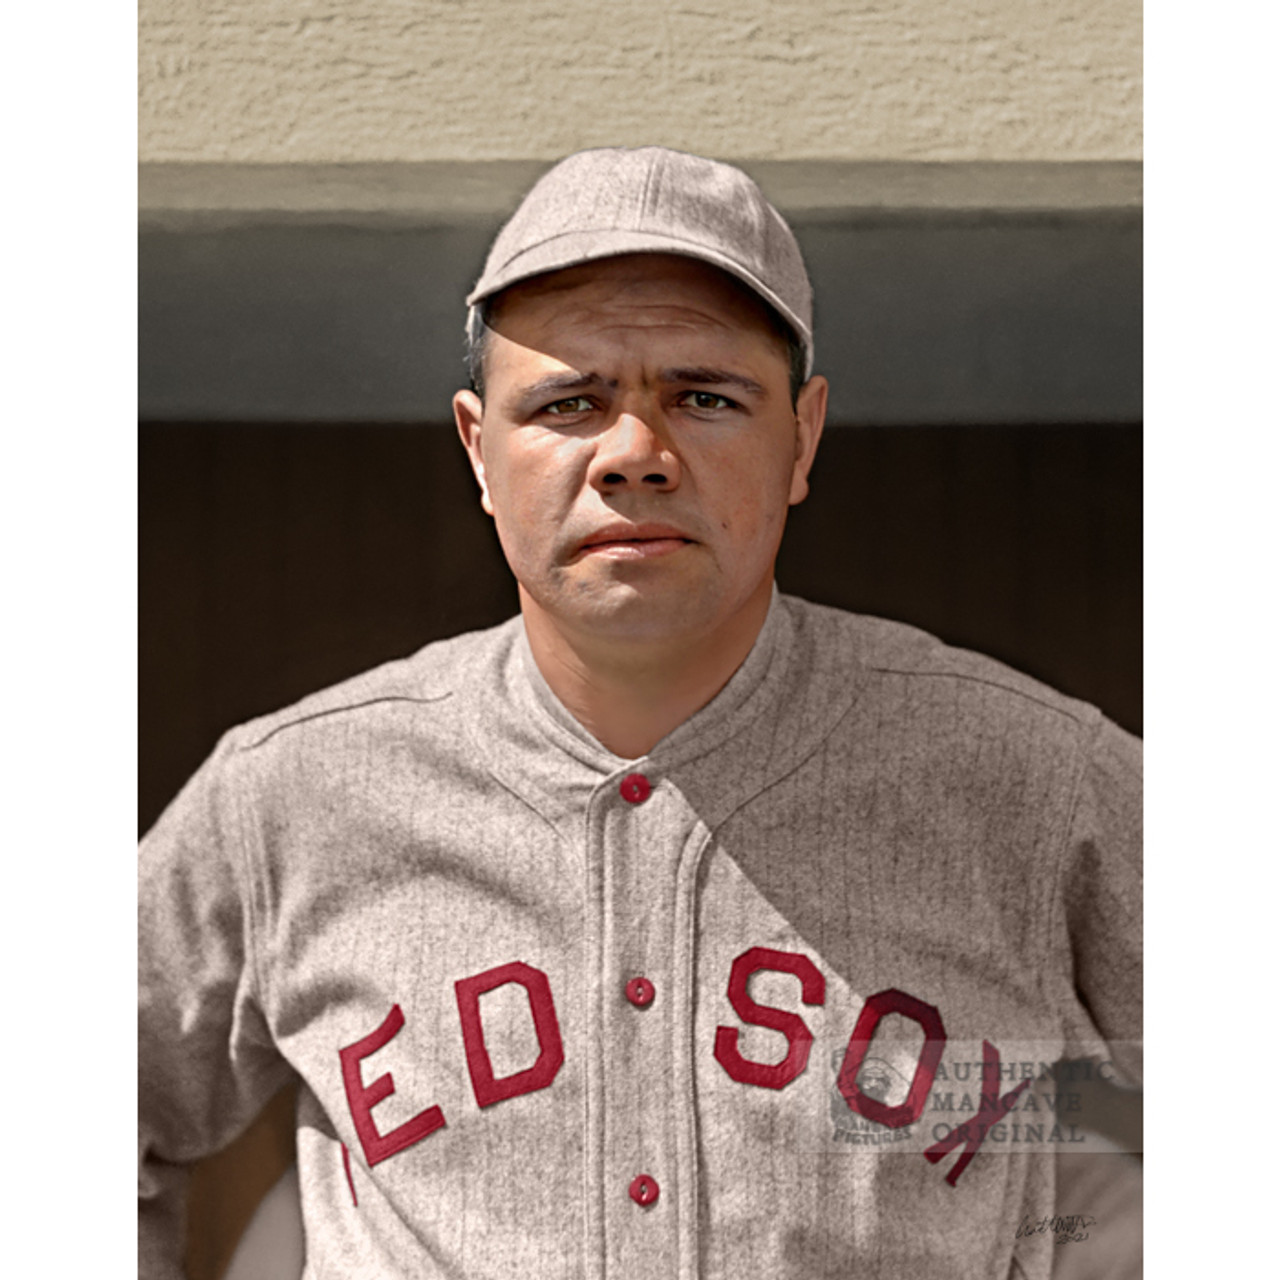 Babe Ruth 1919 Boston Red Sox 11 x 14 Colorized Print